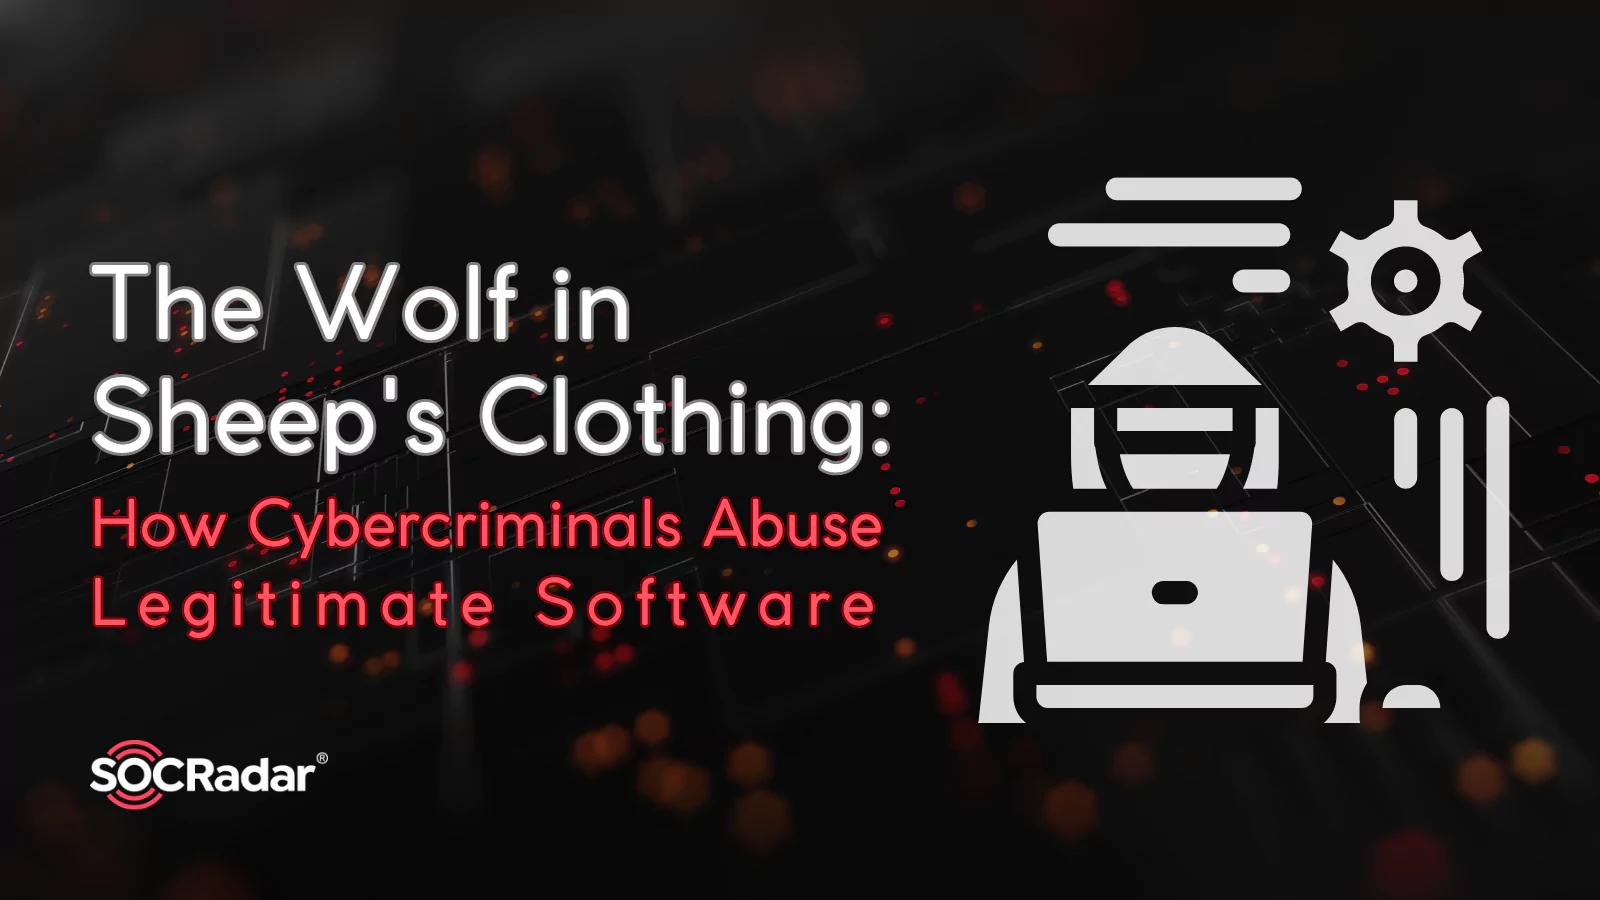 SOCRadar® Cyber Intelligence Inc. | The Wolf in Sheep’s Clothing: How Cybercriminals Abuse Legitimate Software